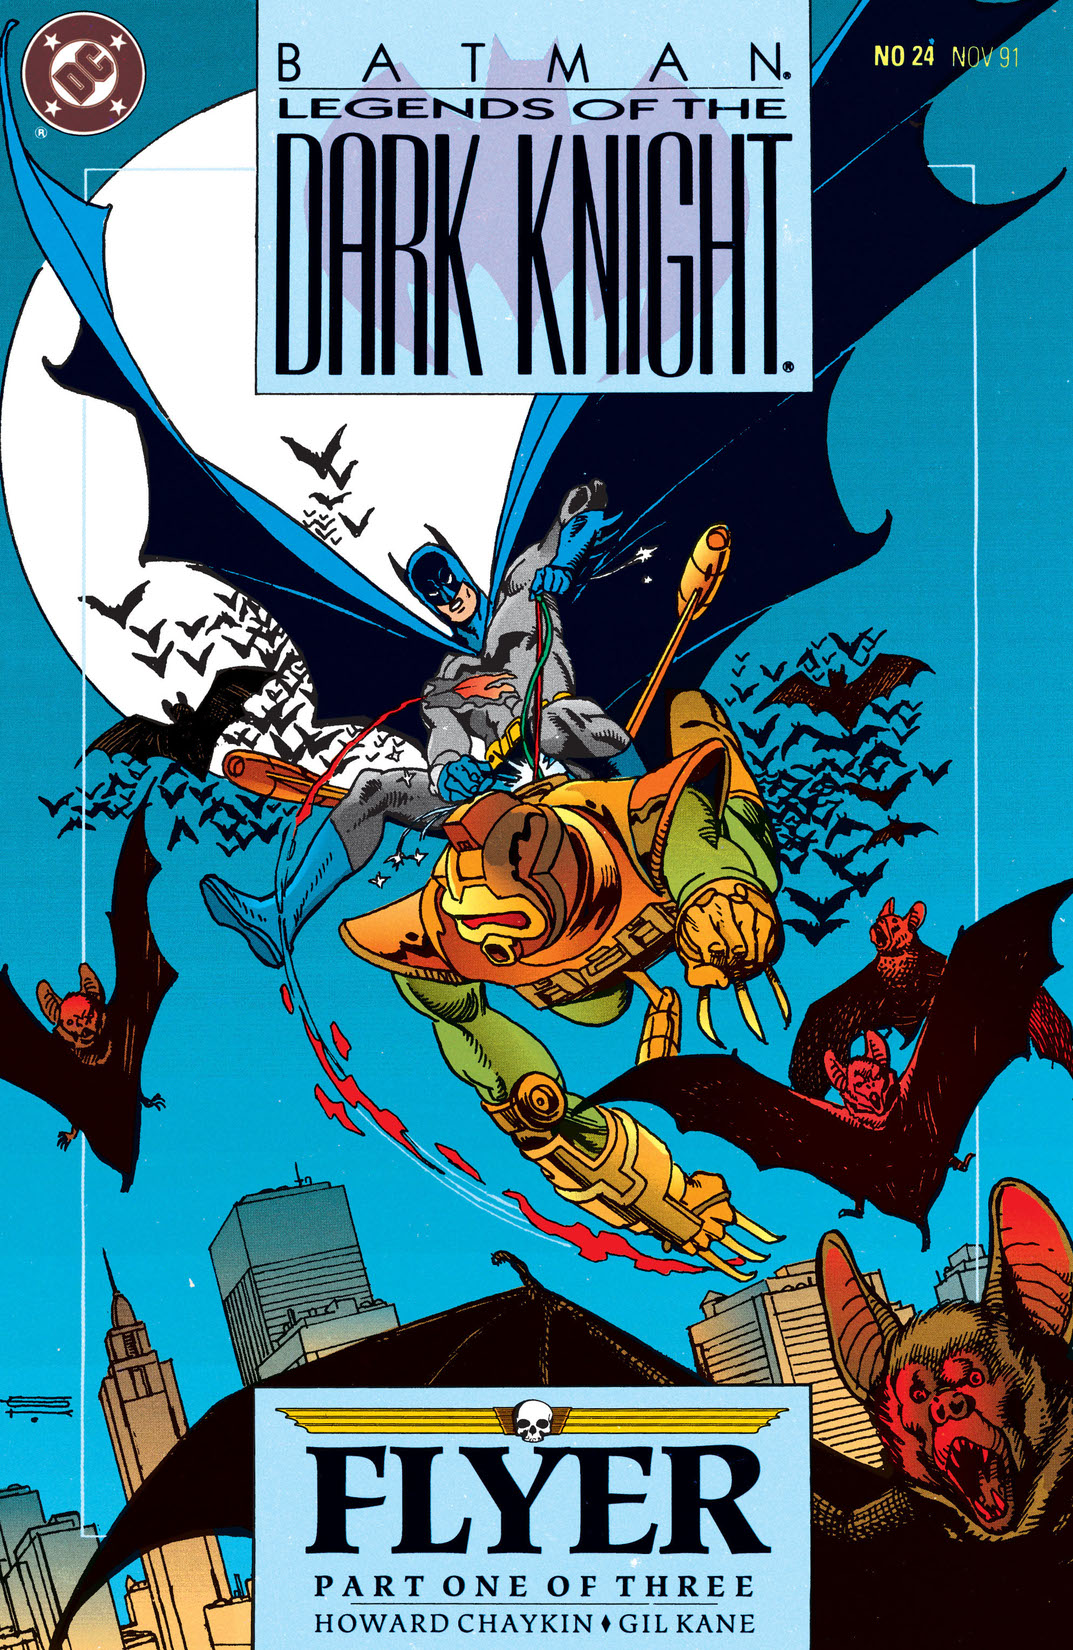 Batman: Legends of the Dark Knight #24 preview images